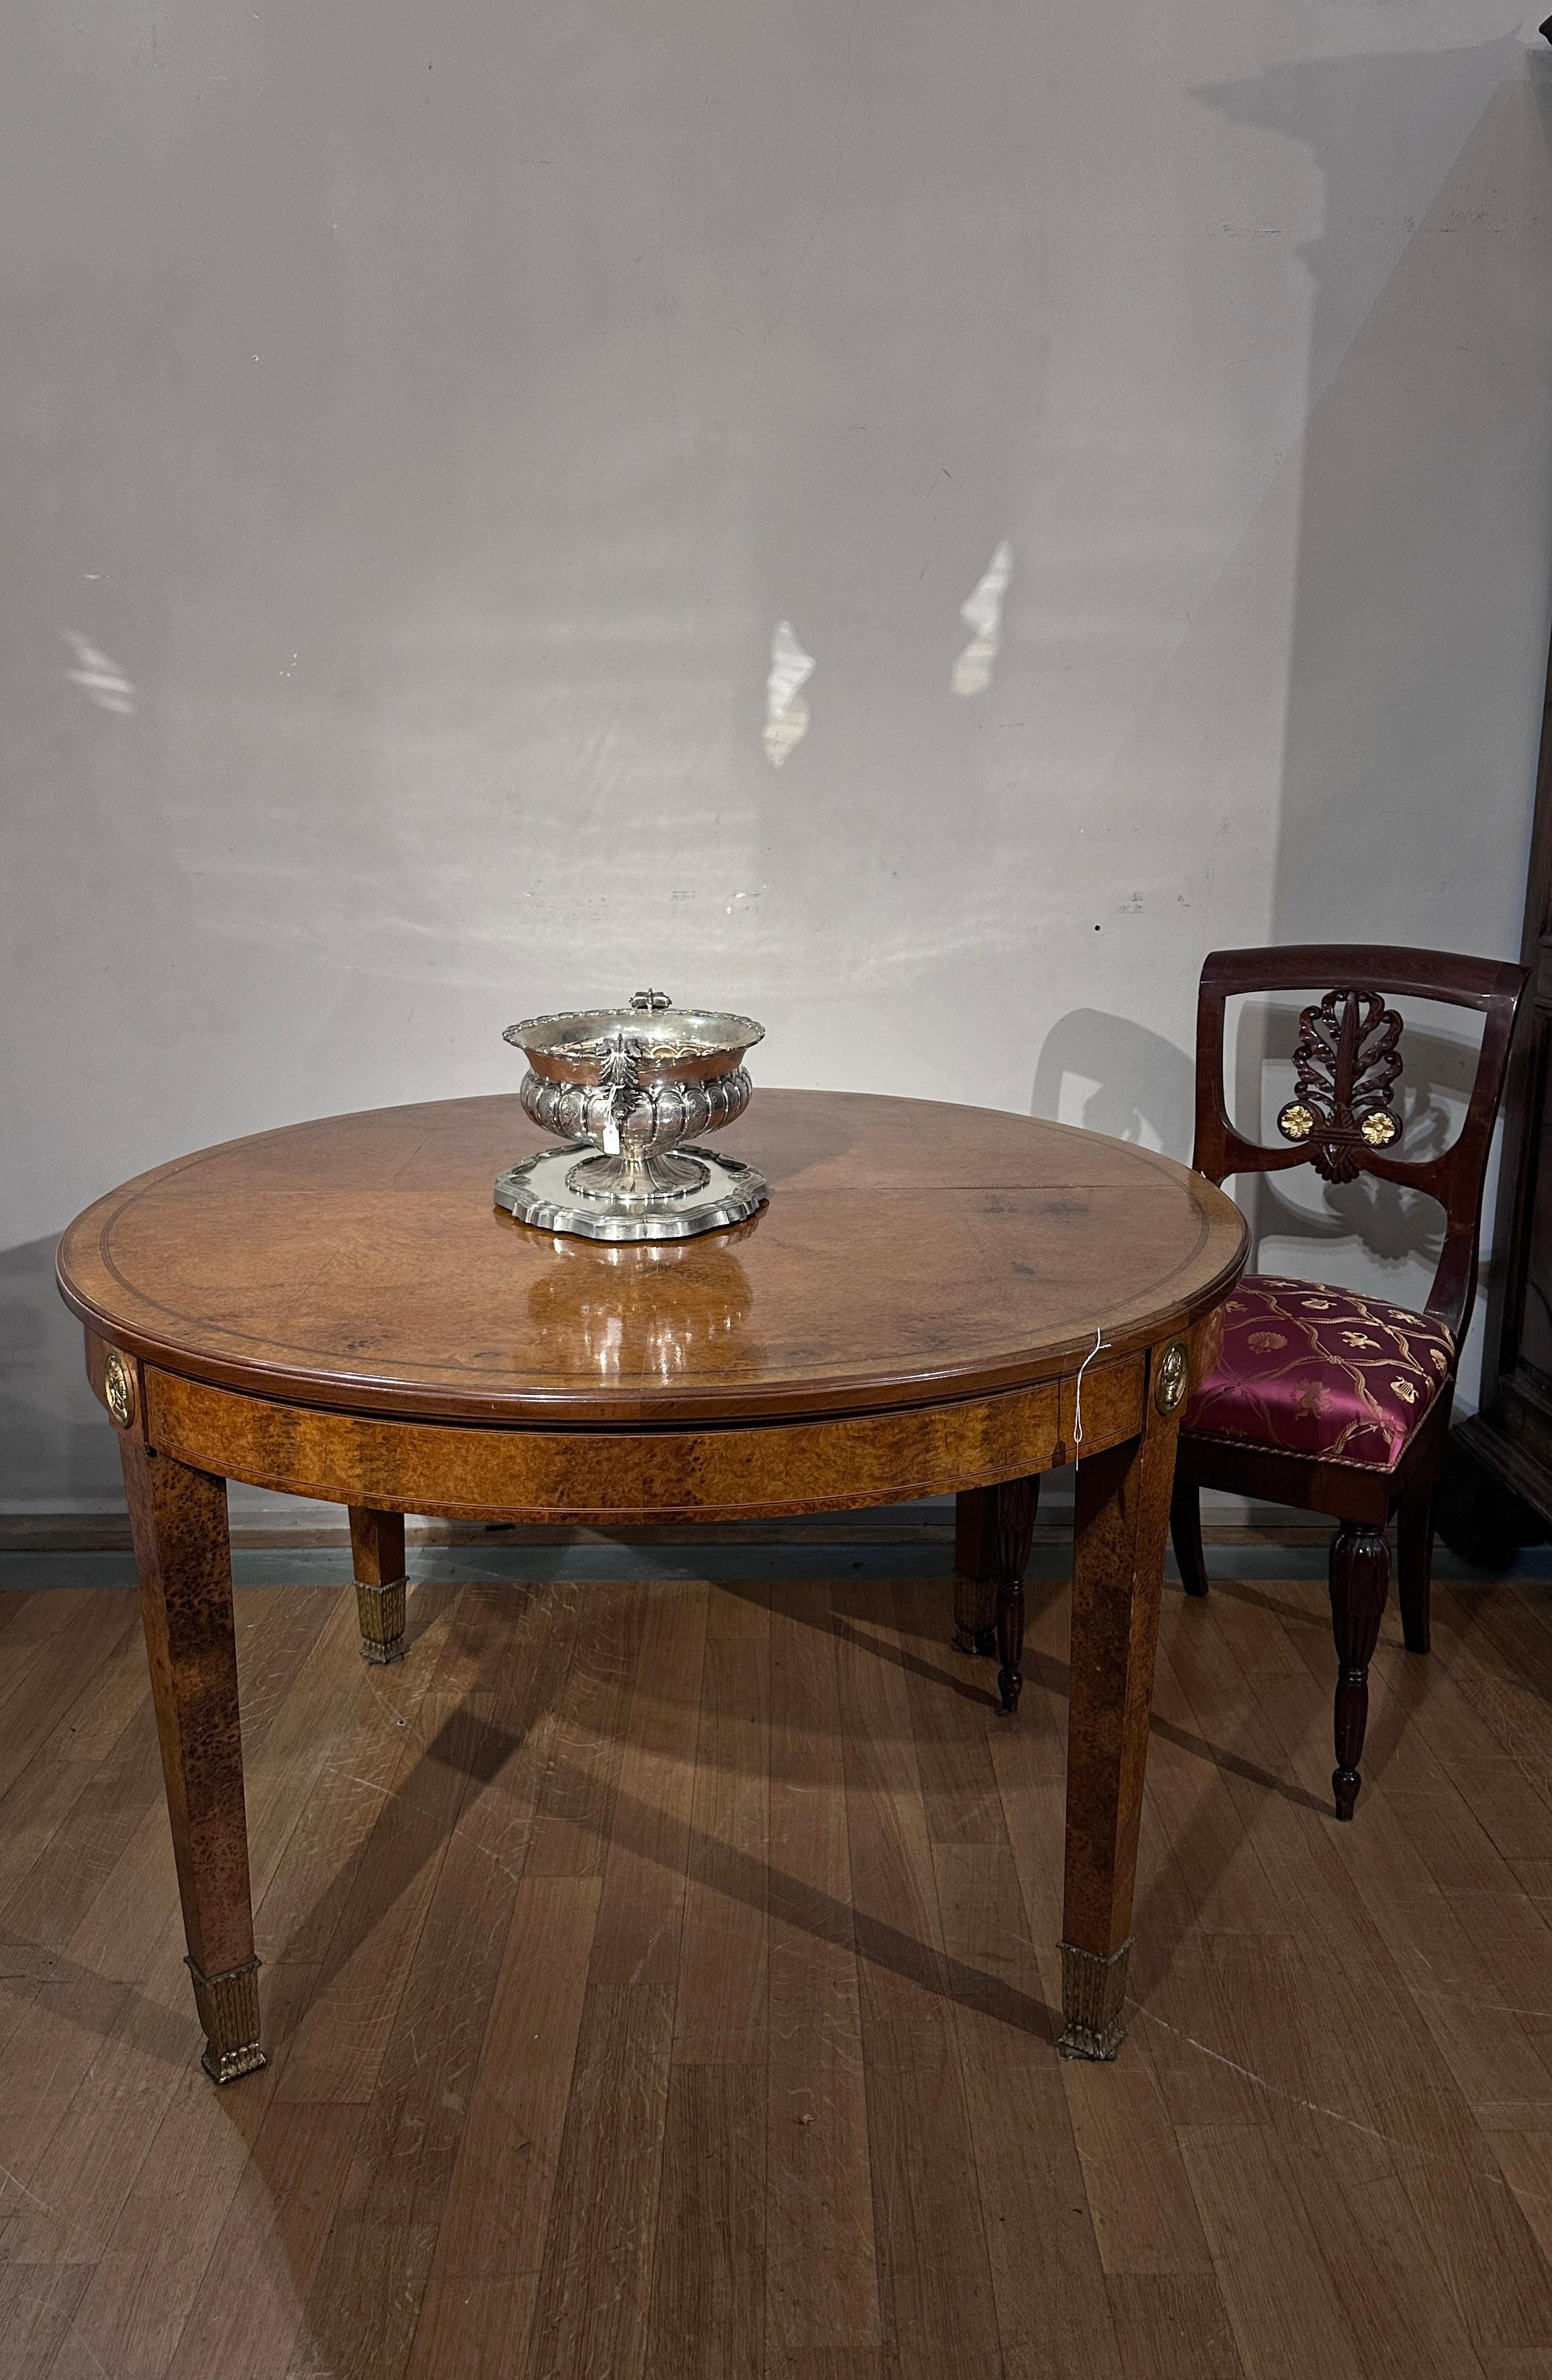 END OF THE 19th CENTURY OVAL TABLE IN MAPLE  For Sale 2